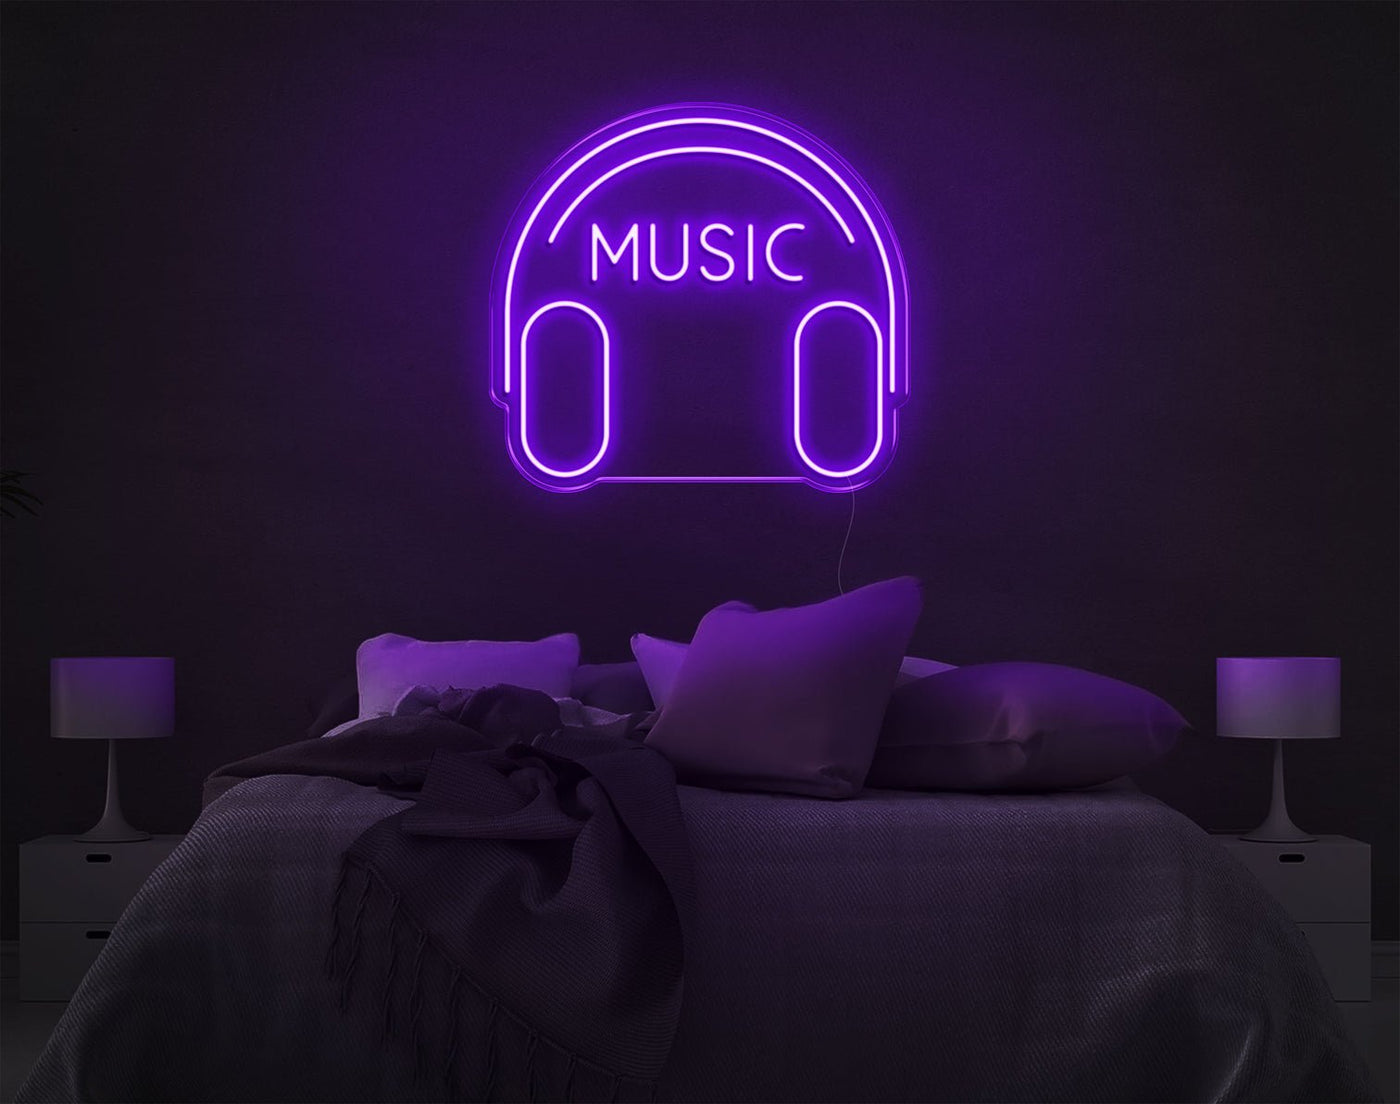 Music V2 LED Neon Sign - 19inch x 20inchHot Pink